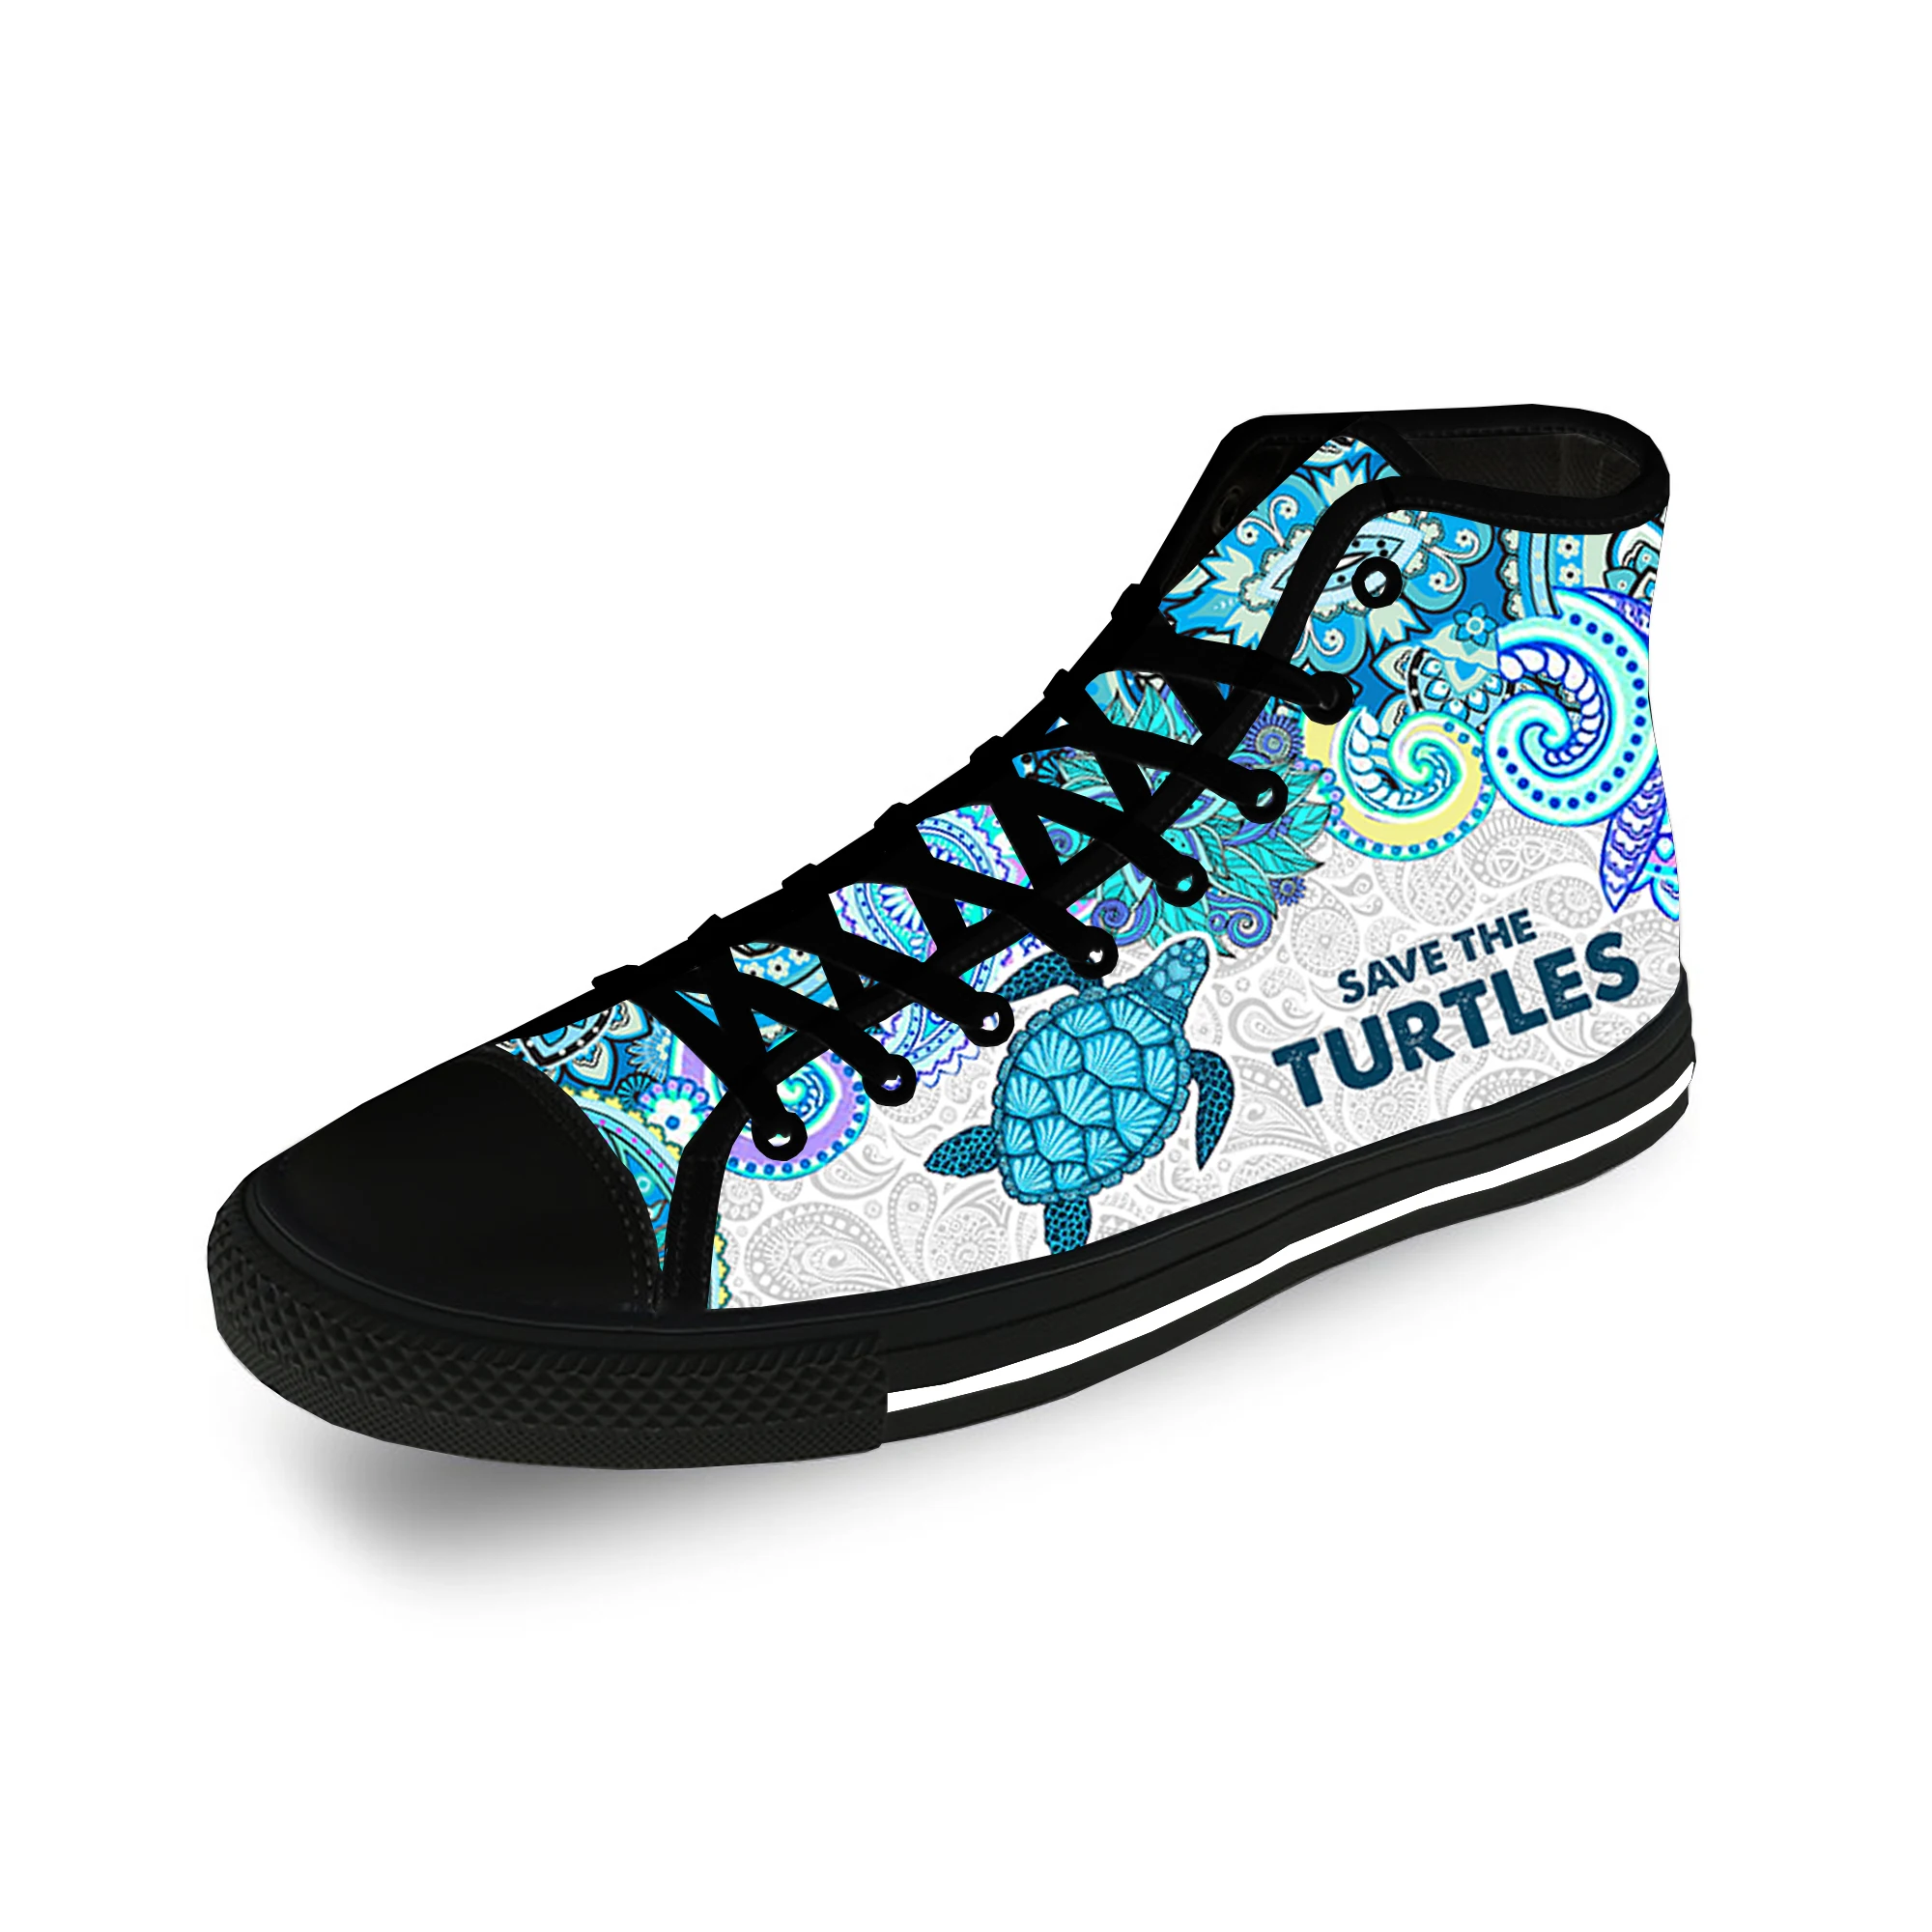 music for your pleasure high top sneakers mens womens teenager casual shoes roxy canvas running shoes 3d print lightweight shoe Save The Turtles High Top Sneakers Mens Womens Teenager Casual Shoes Canvas Running Shoes 3D Print Breathable Lightweight shoe